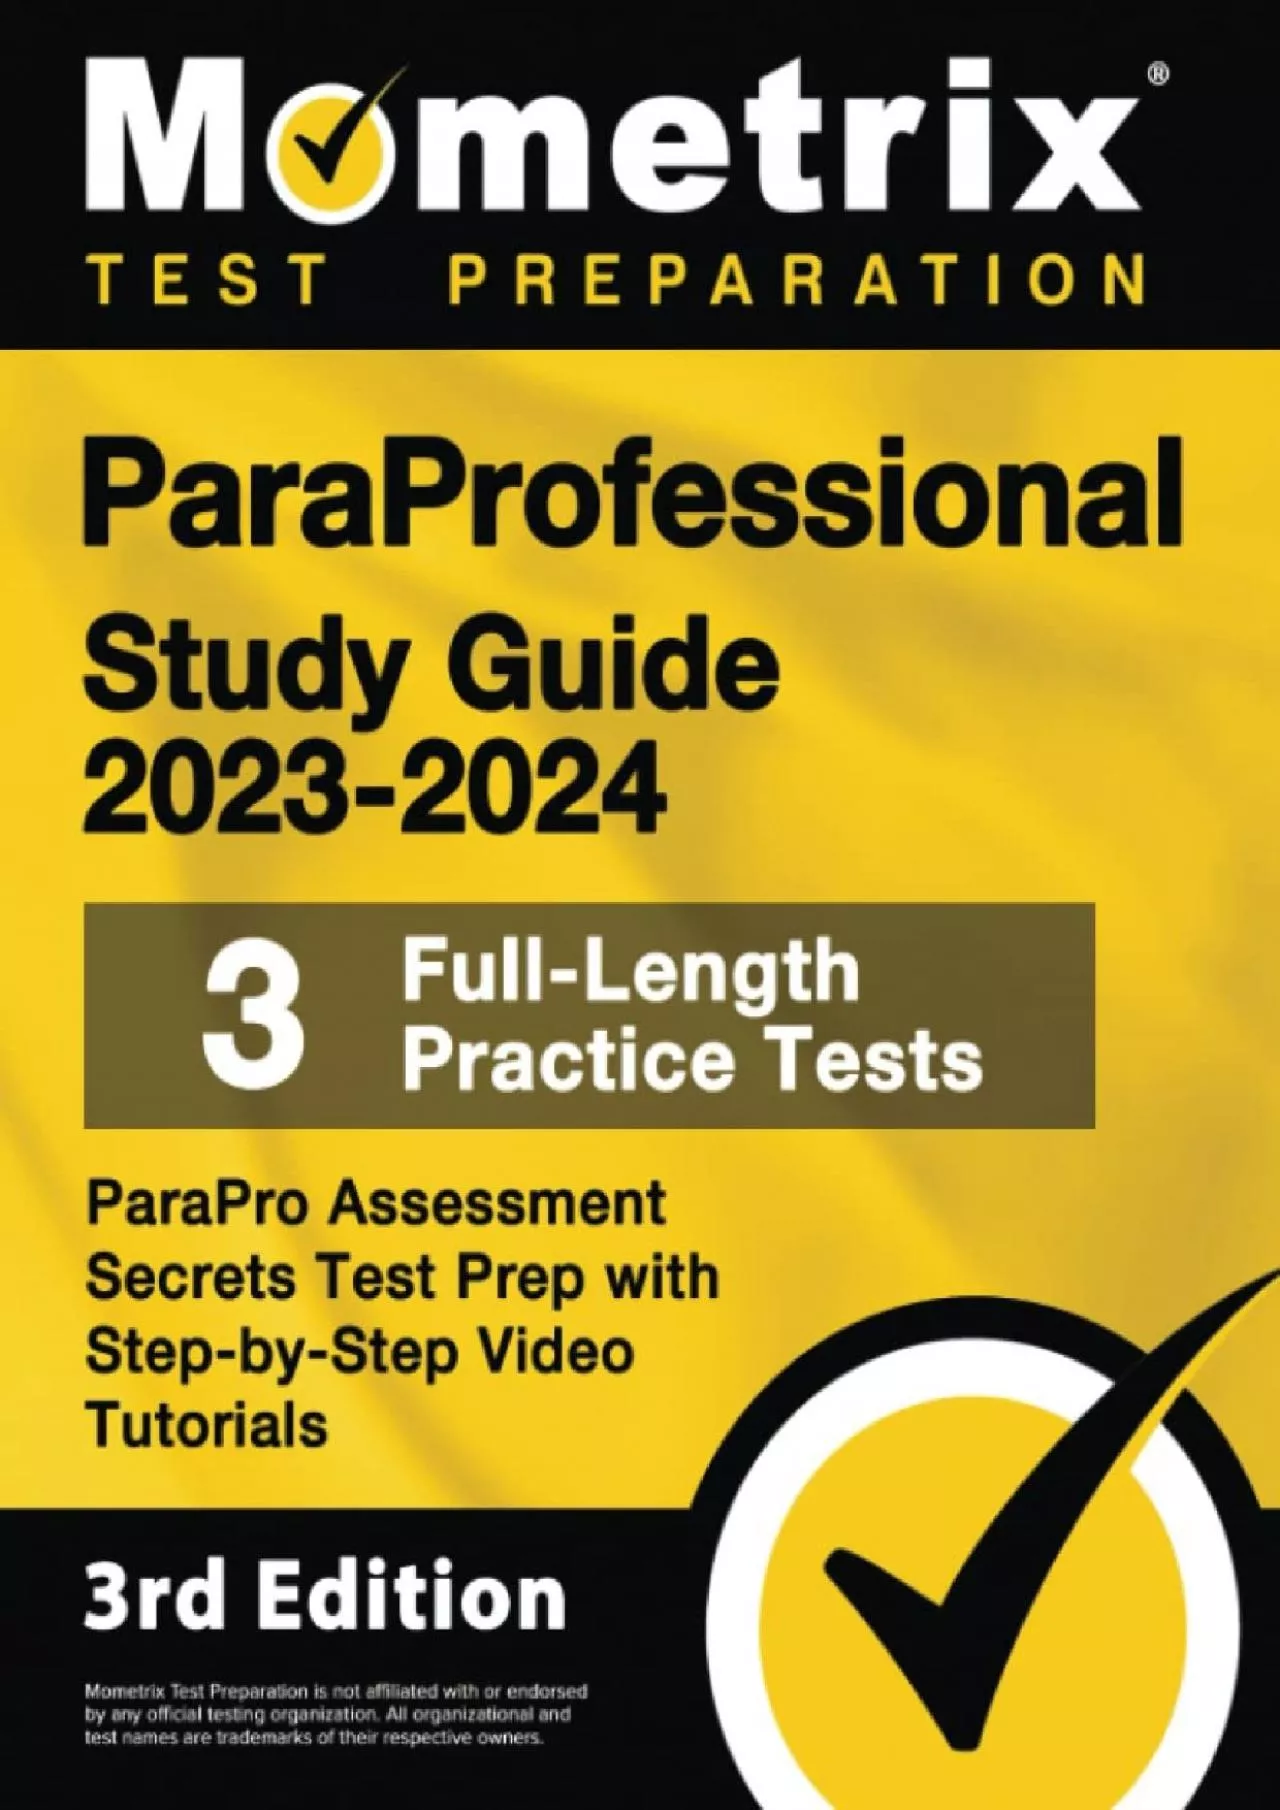 [READ] ParaProfessional Study Guide 2023-2024 - 3 Full-Length Practice Tests, ParaPro